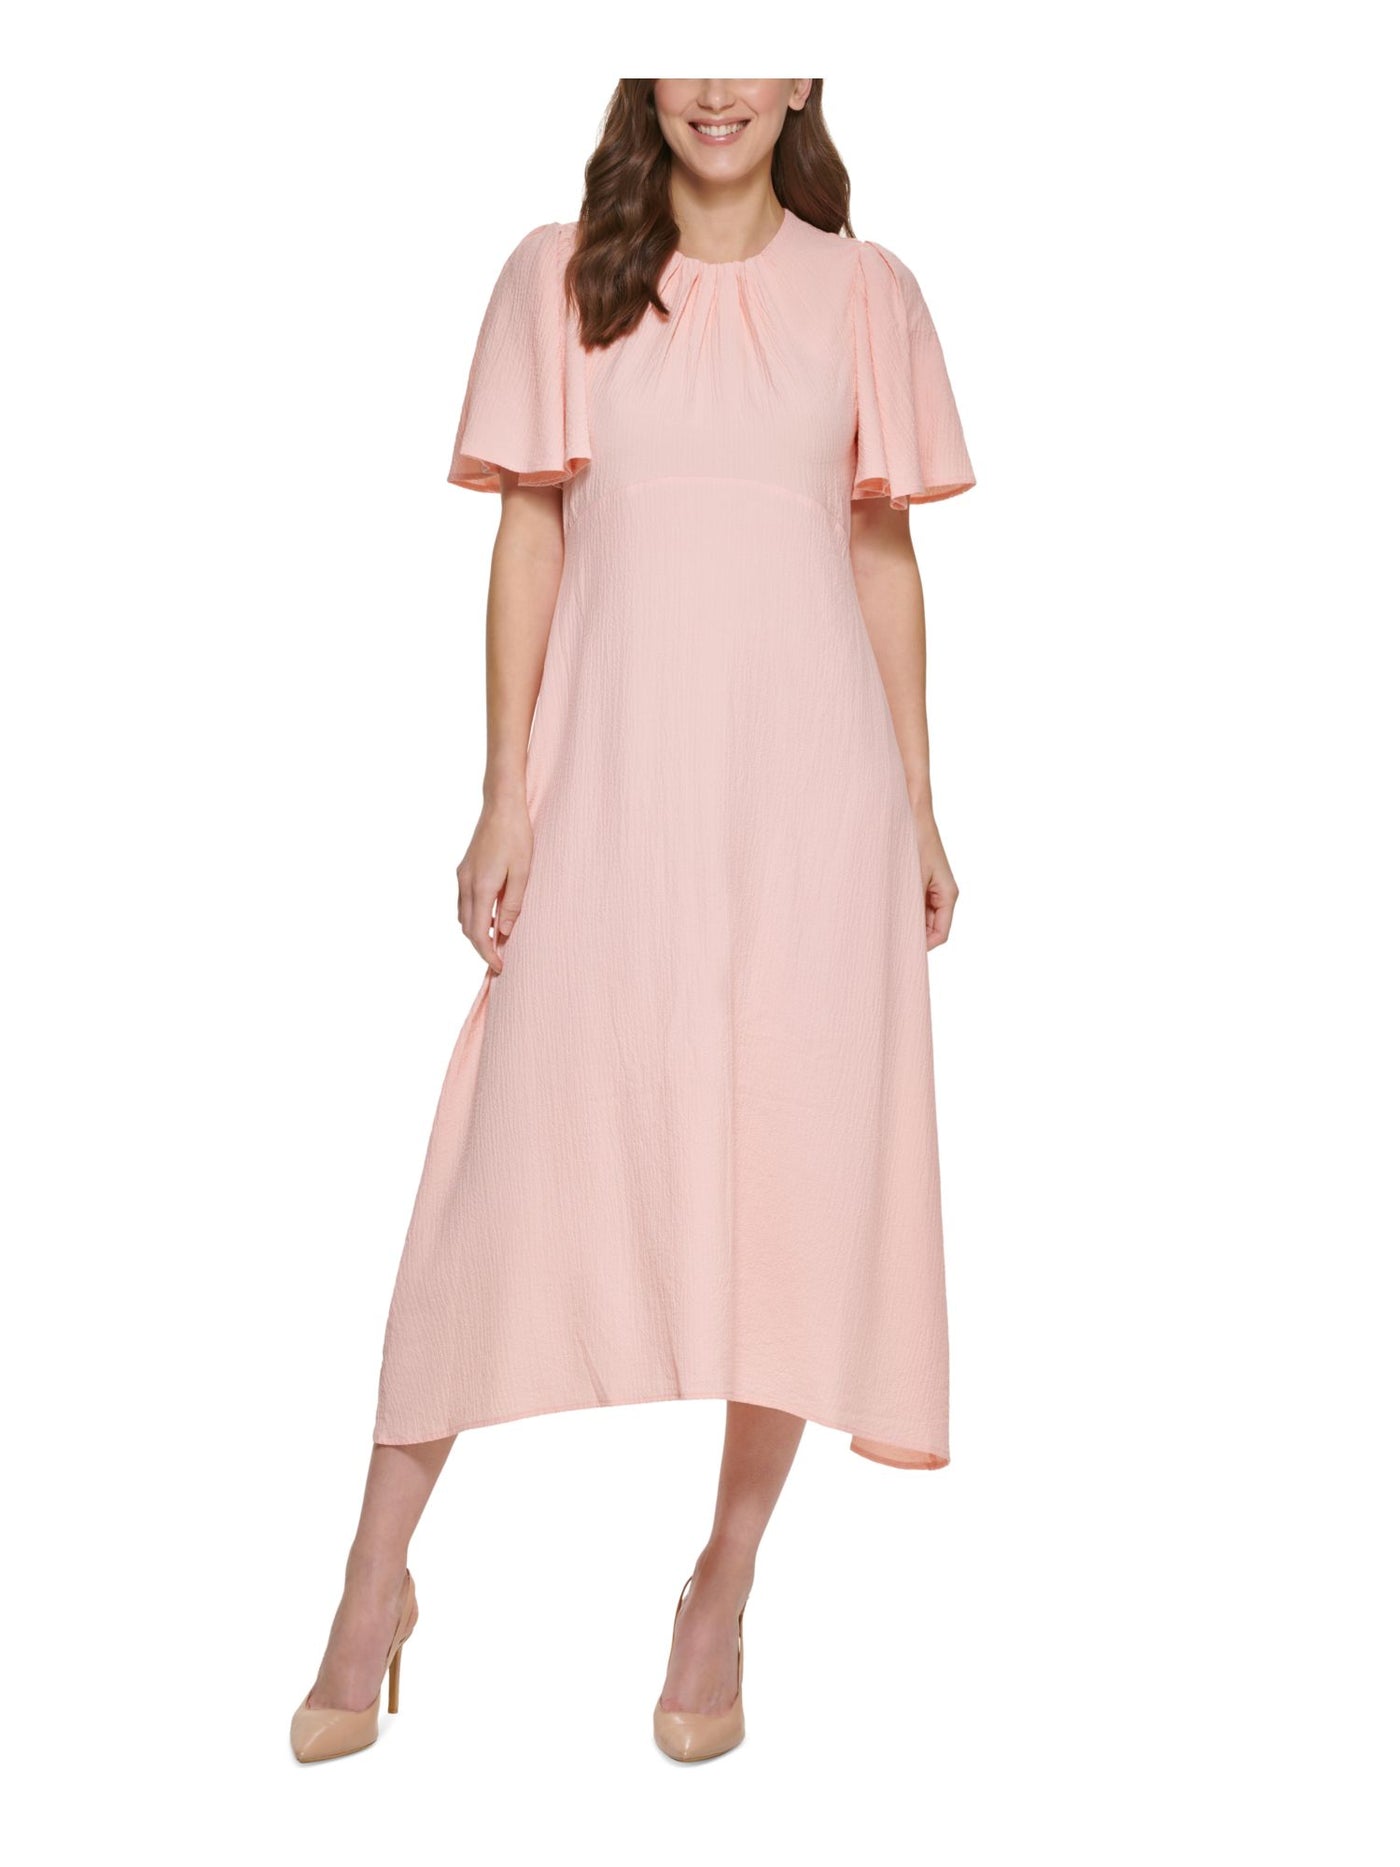 CALVIN KLEIN Womens Pink Pleated Zippered Textured Flutter Sleeve Round Neck Midi Party Fit + Flare Dress 12